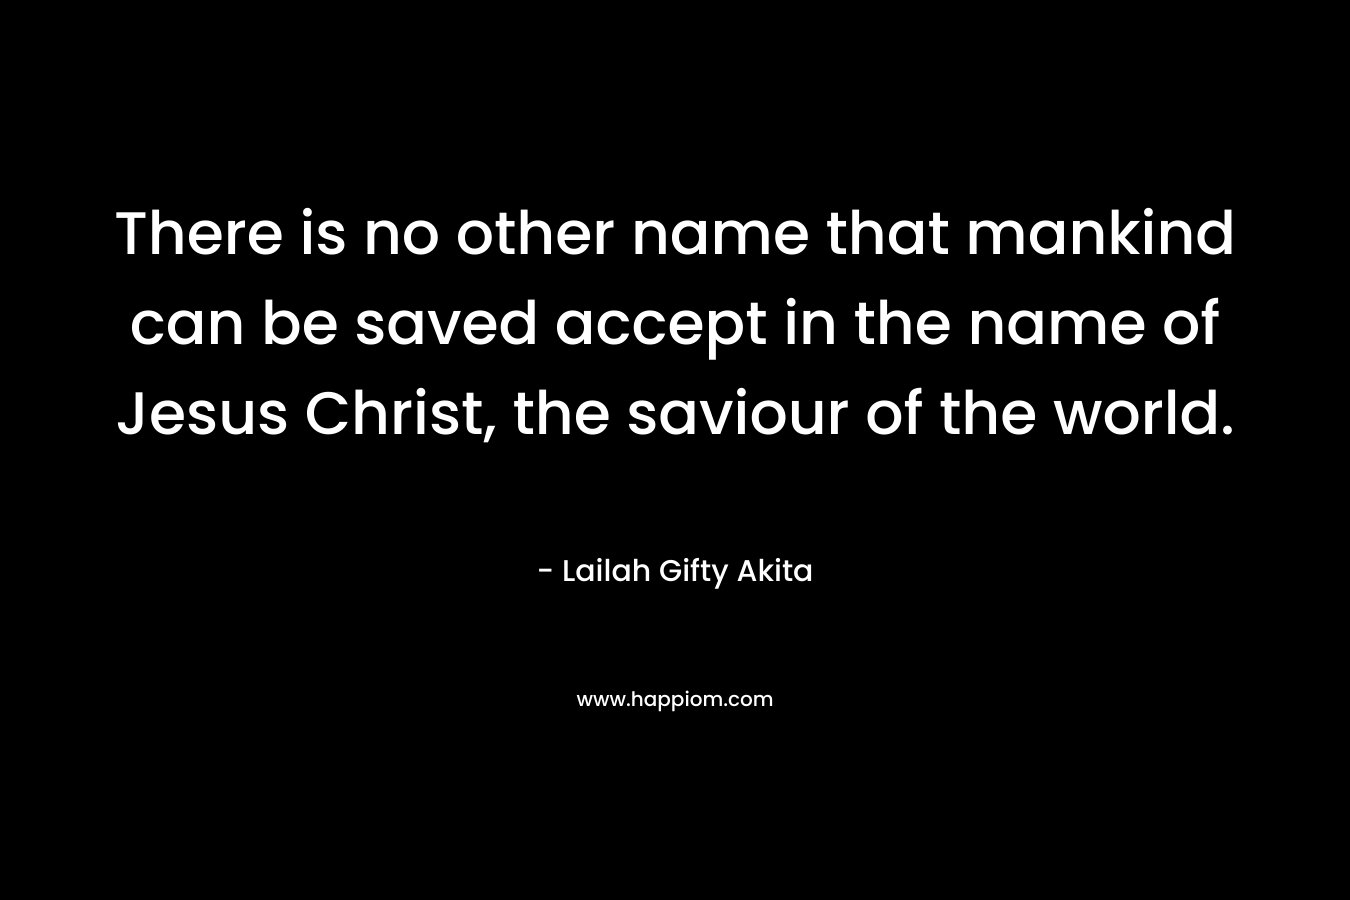 There is no other name that mankind can be saved accept in the name of Jesus Christ, the saviour of the world. – Lailah Gifty Akita